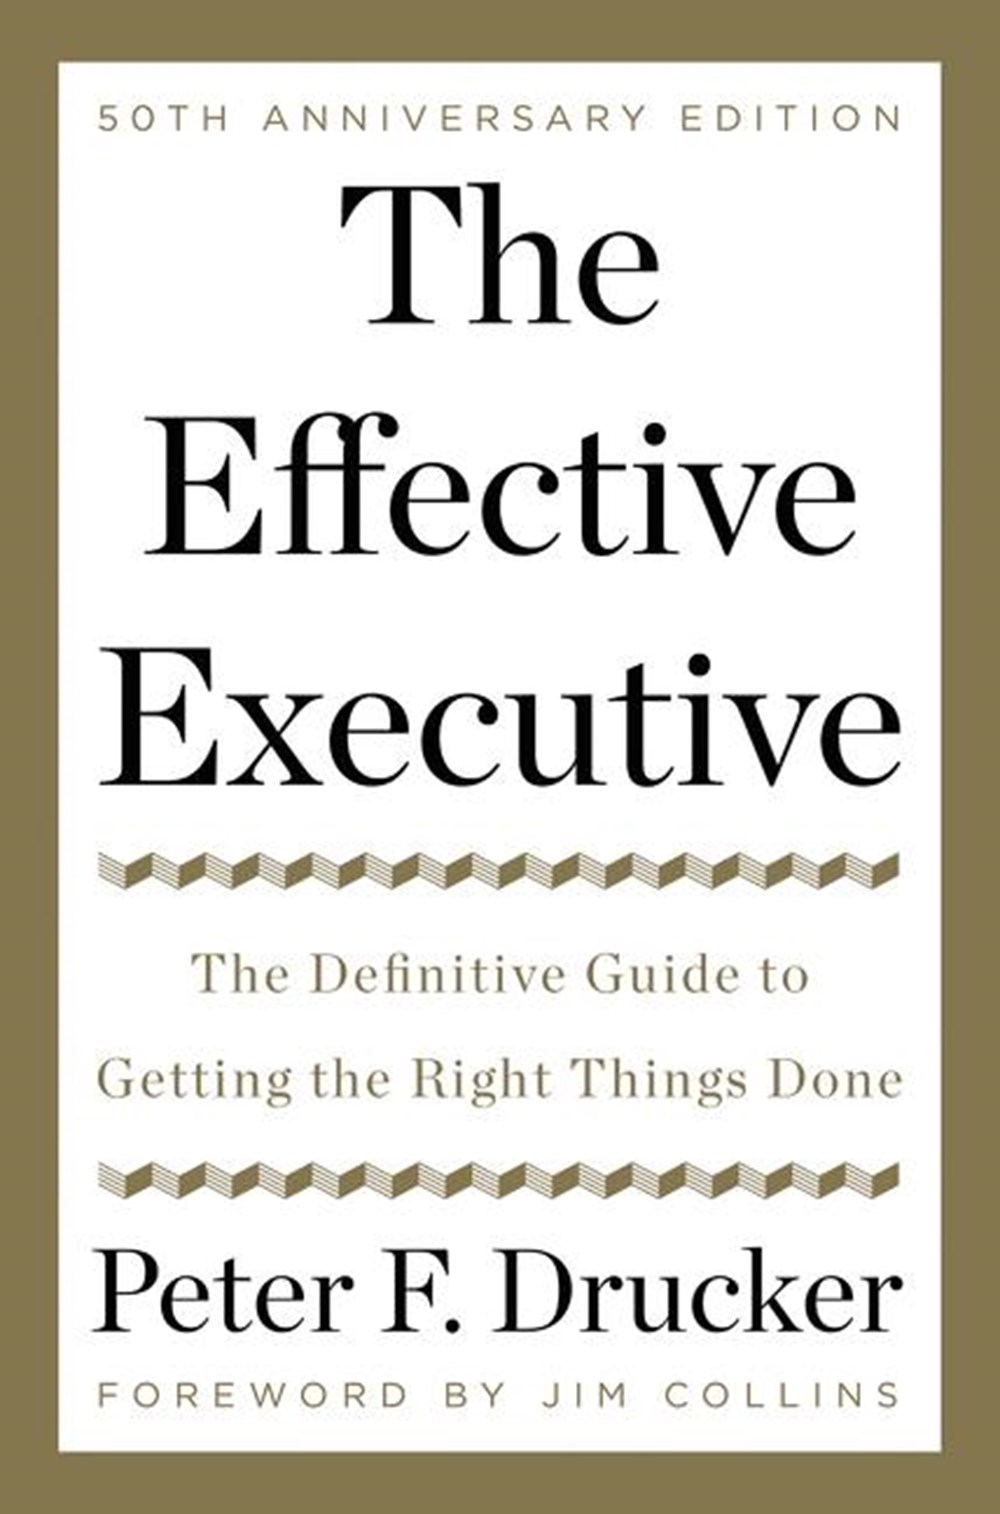 Effective Executive The Definitive Guide to Getting the Right Things Done